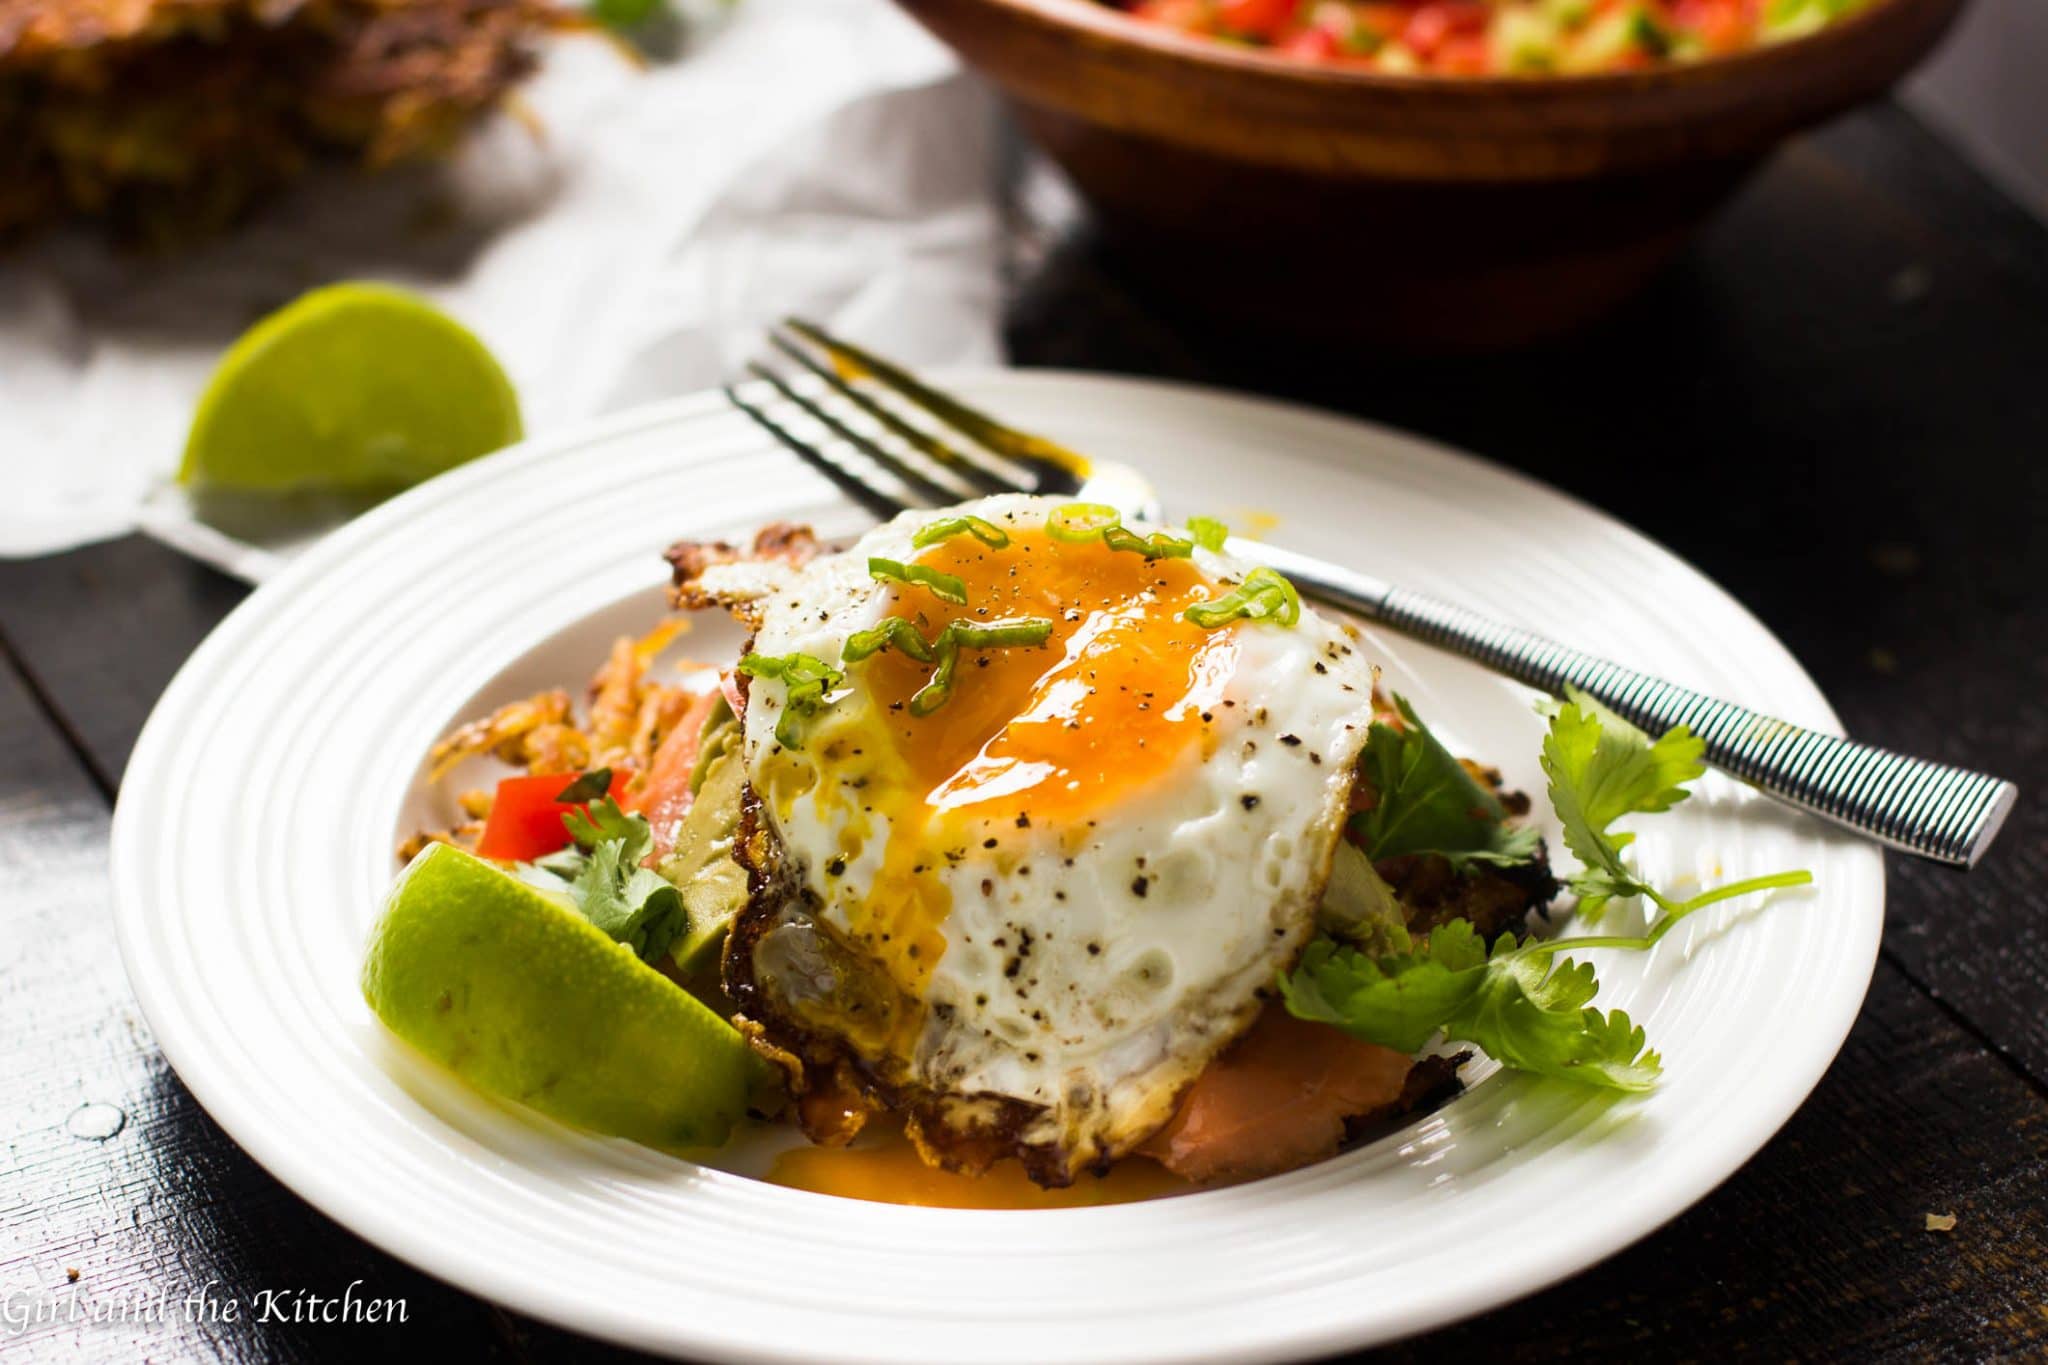 Keep things healthy, crispy and delicious with this hash brown breakfast tostada. Topped with salty smoked salmon, a cucumber salsa and a runny fried egg, this is the perfect breakfast when classic breakfasts are a bore.